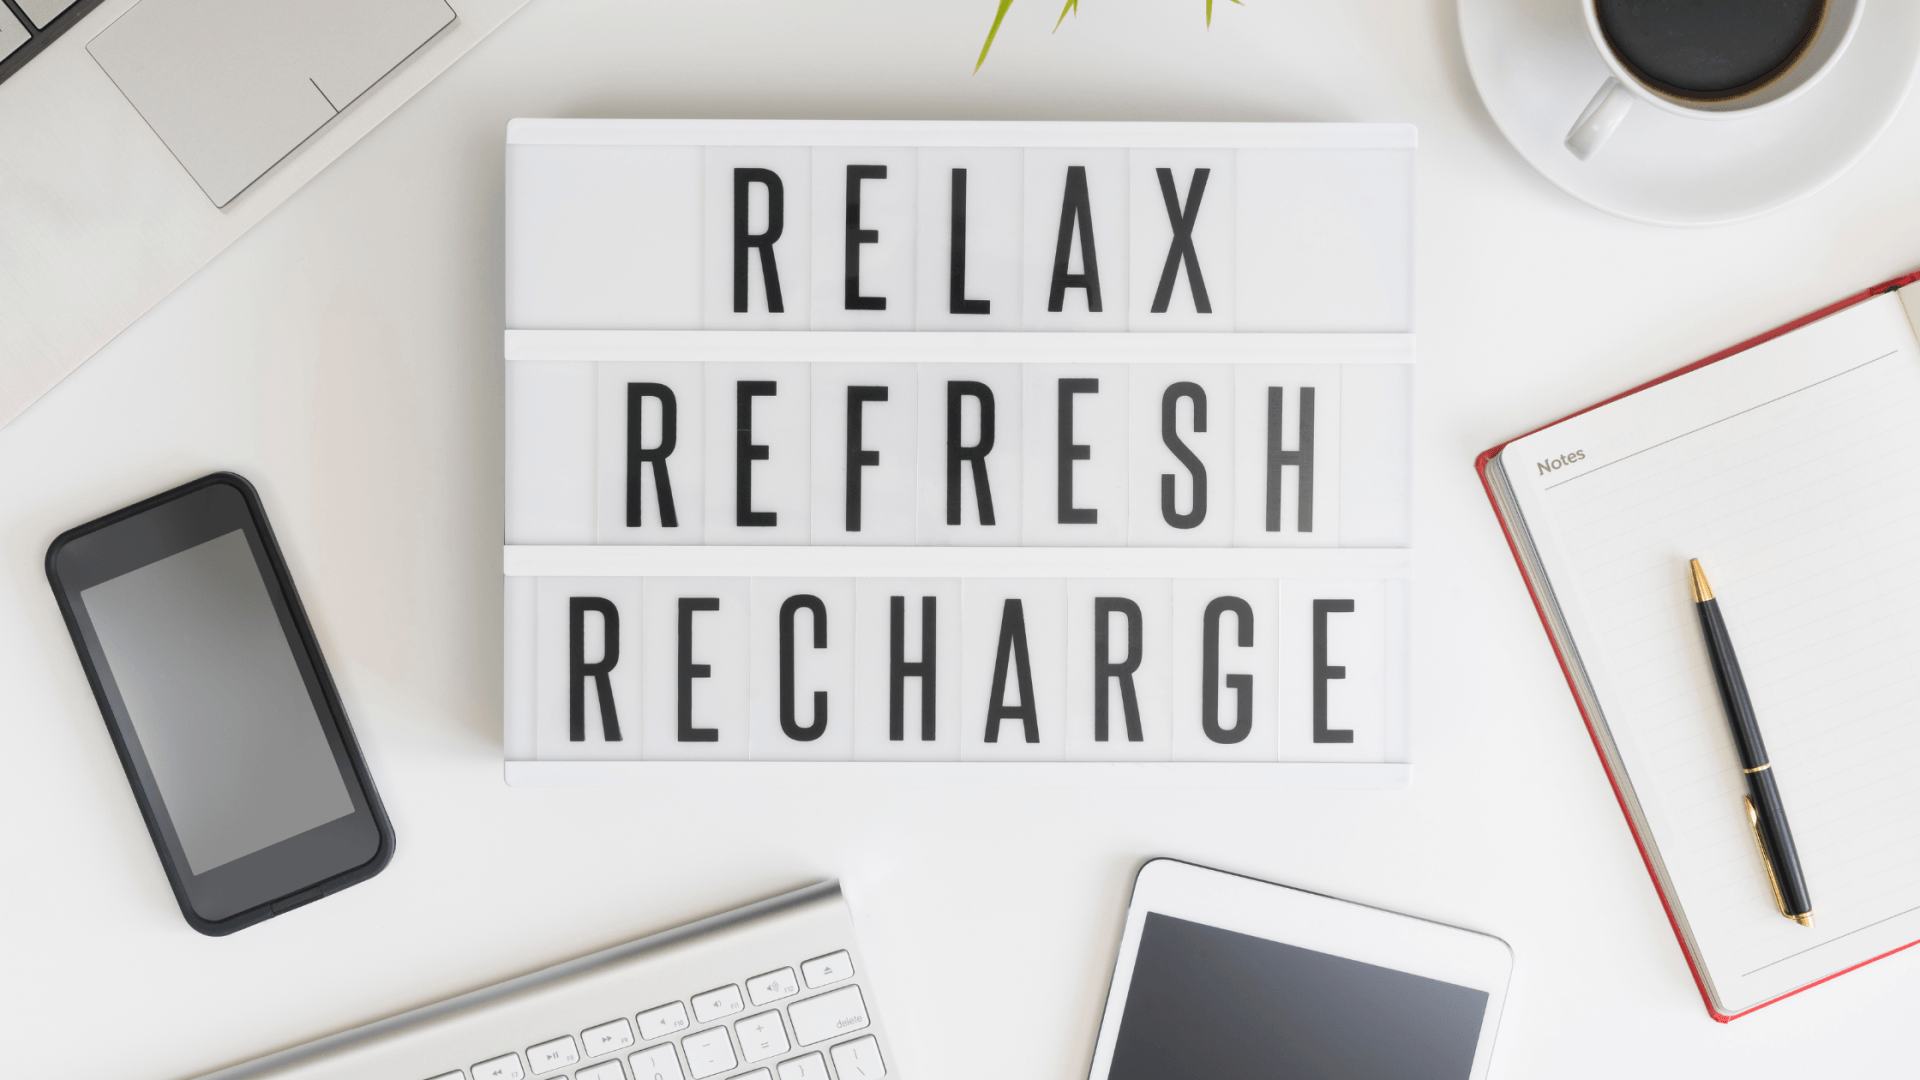 entrepreneur daily routine relax refresh recharge